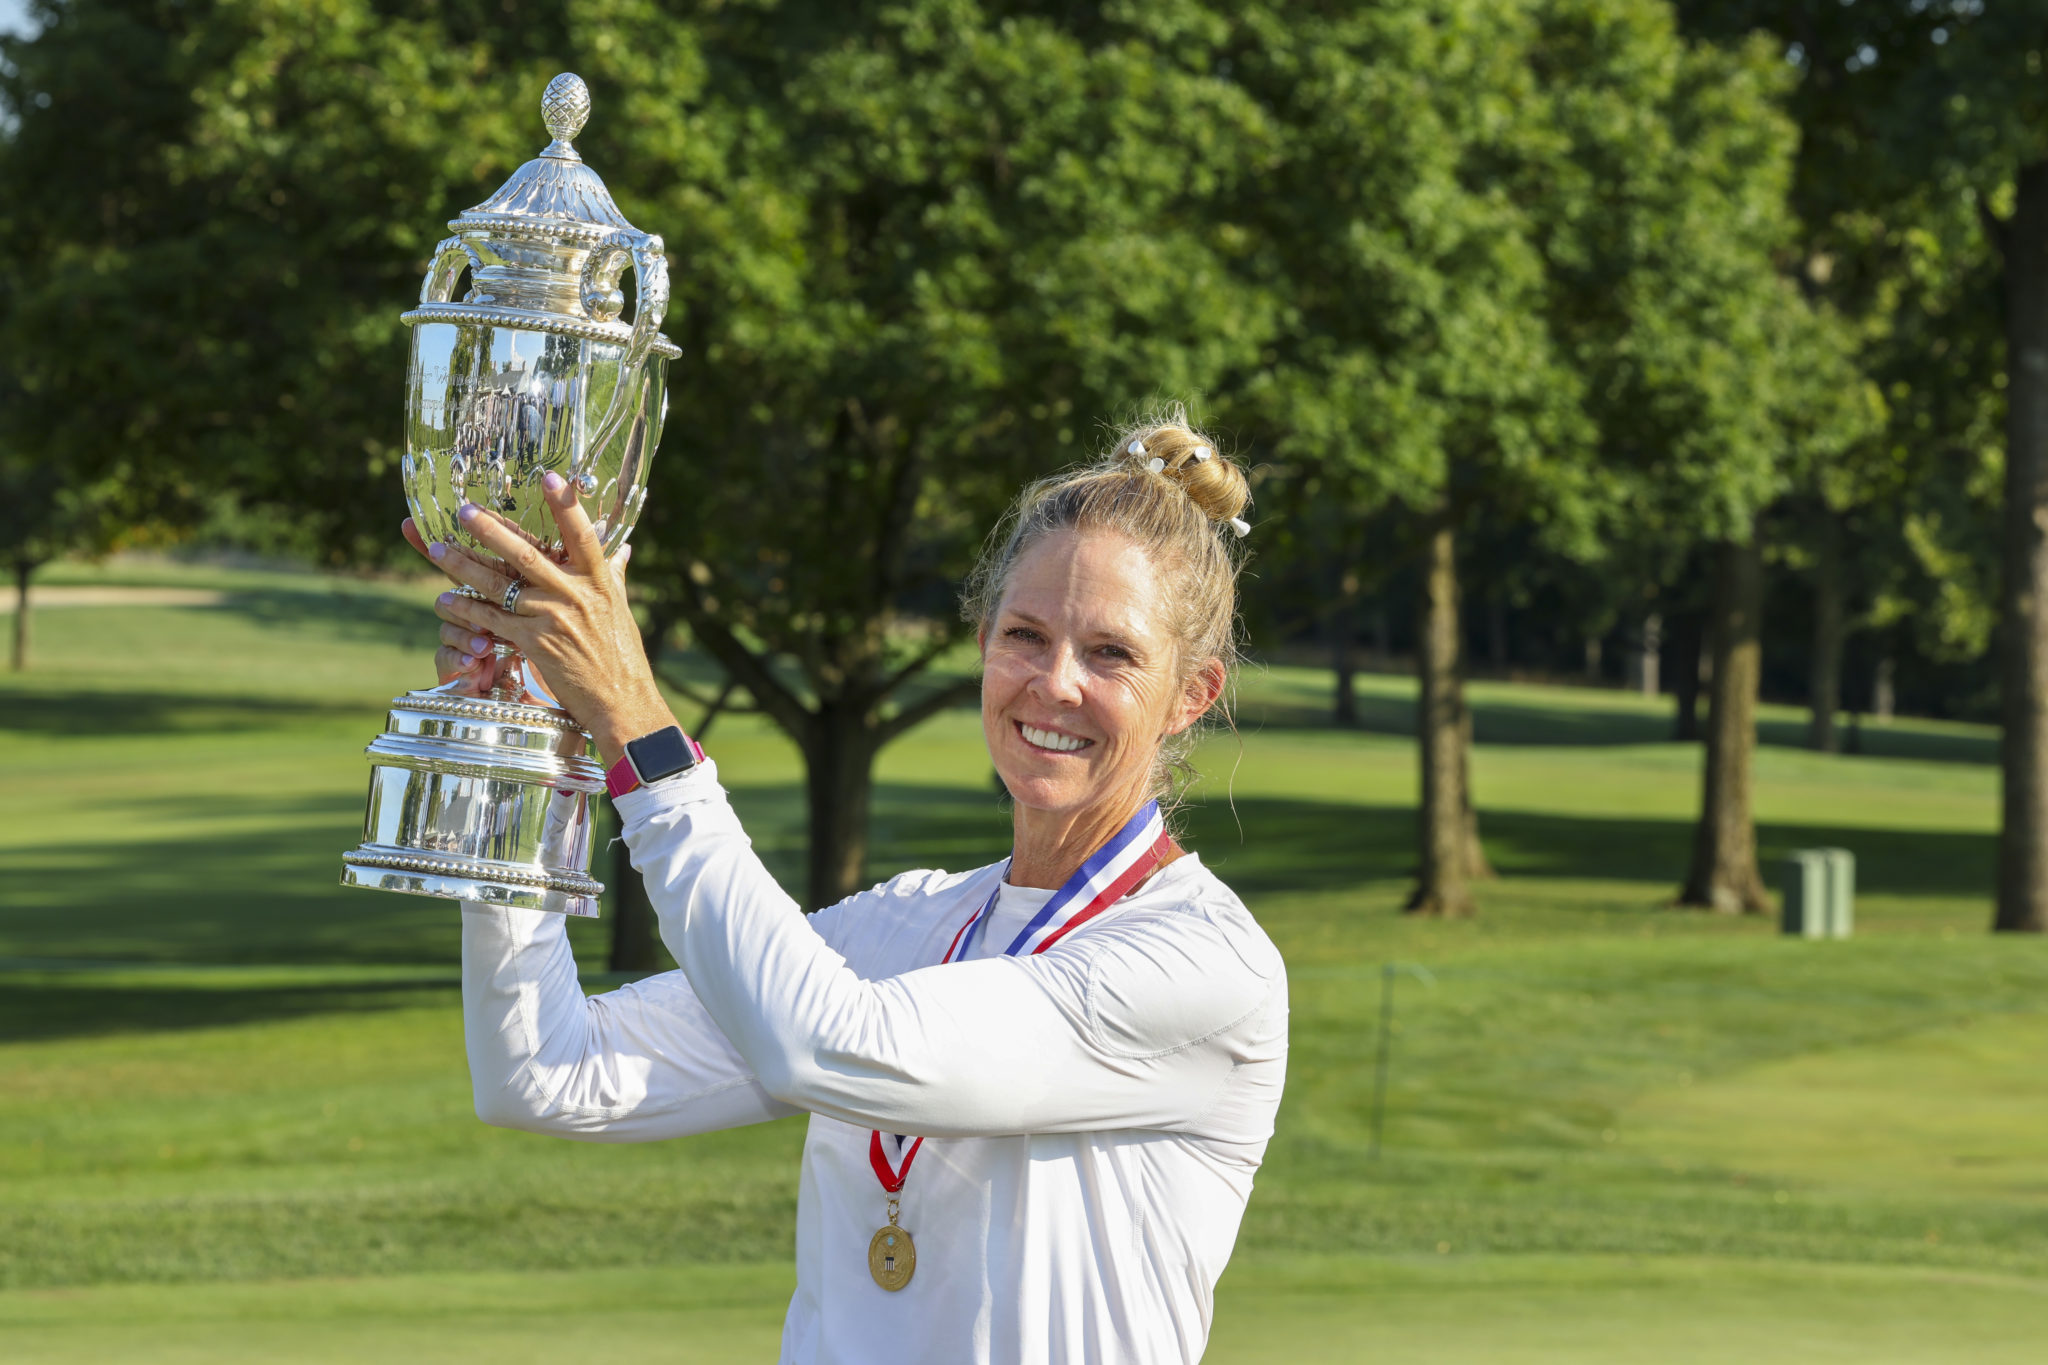 2022 US Senior Women's Open final results Prize money payout